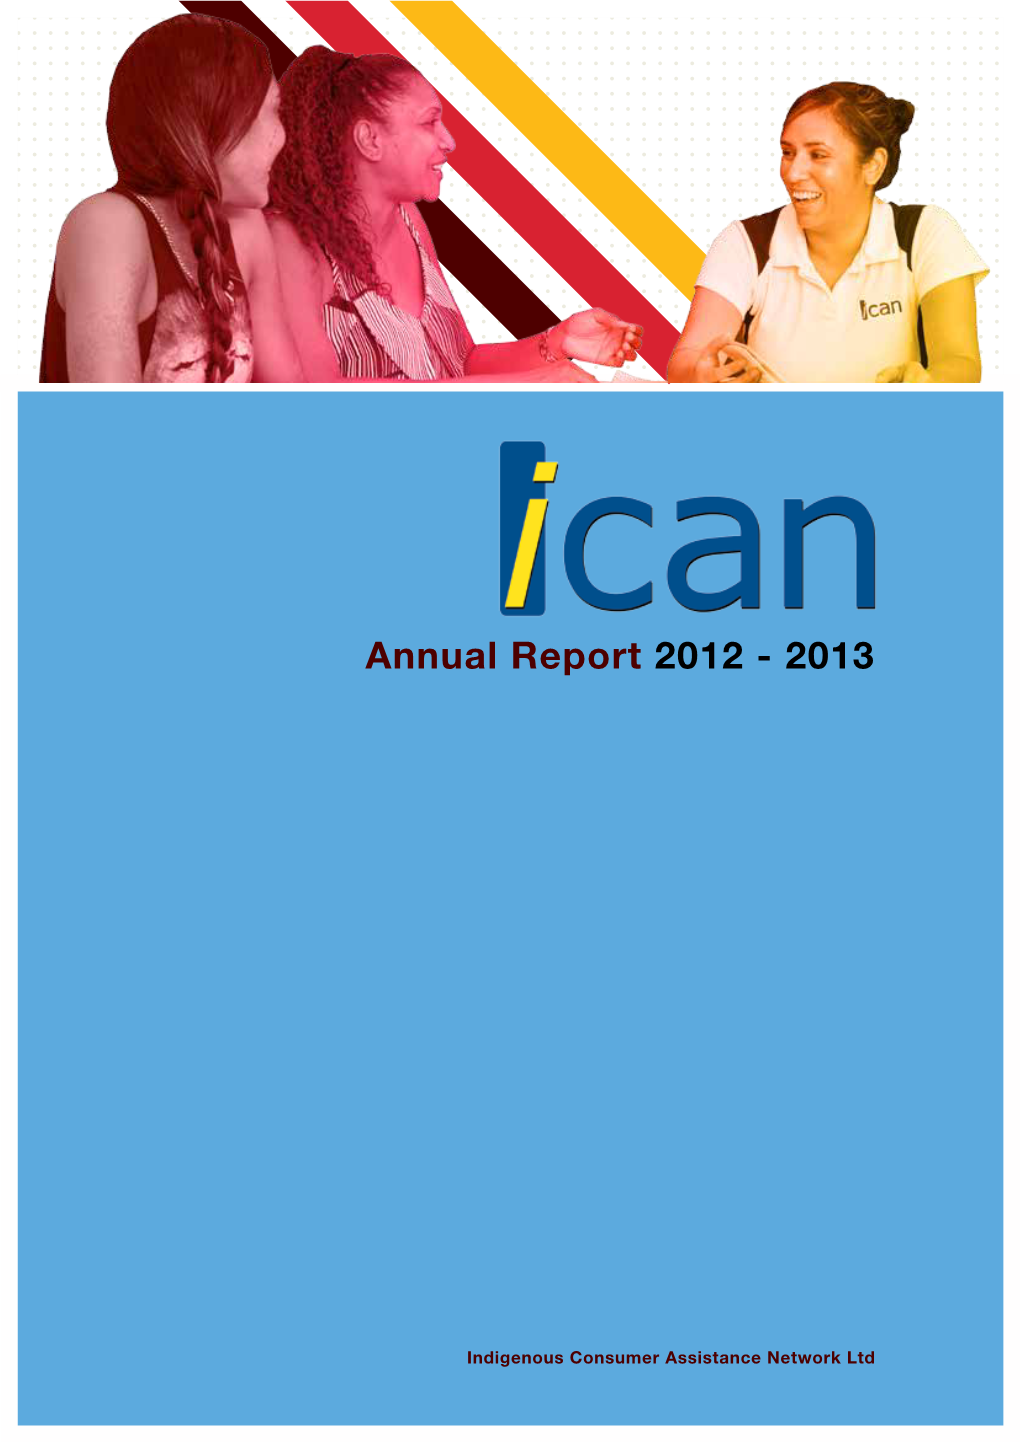 ICAN Annual Report 2012-2013